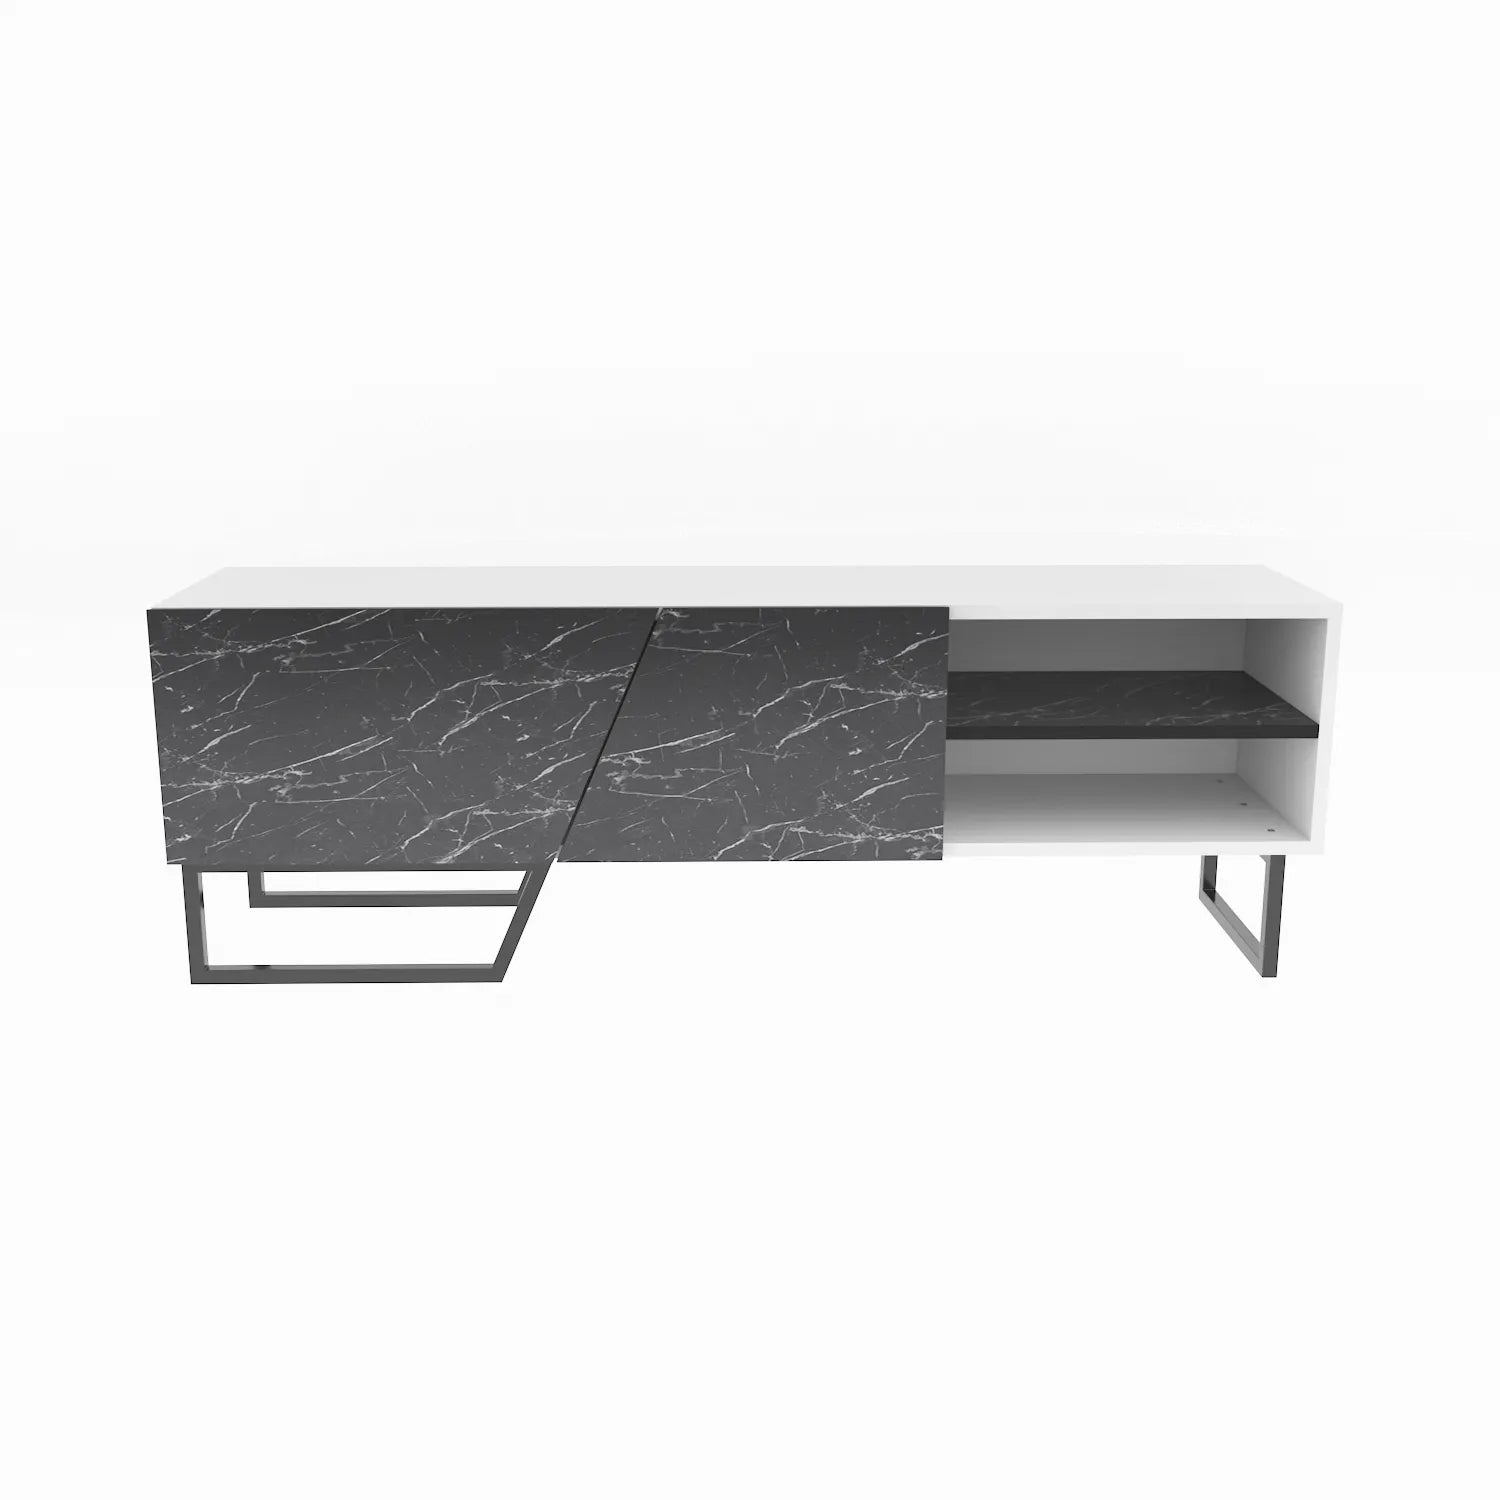 Denasse 60" Wide Modern TV Stand and Media Console